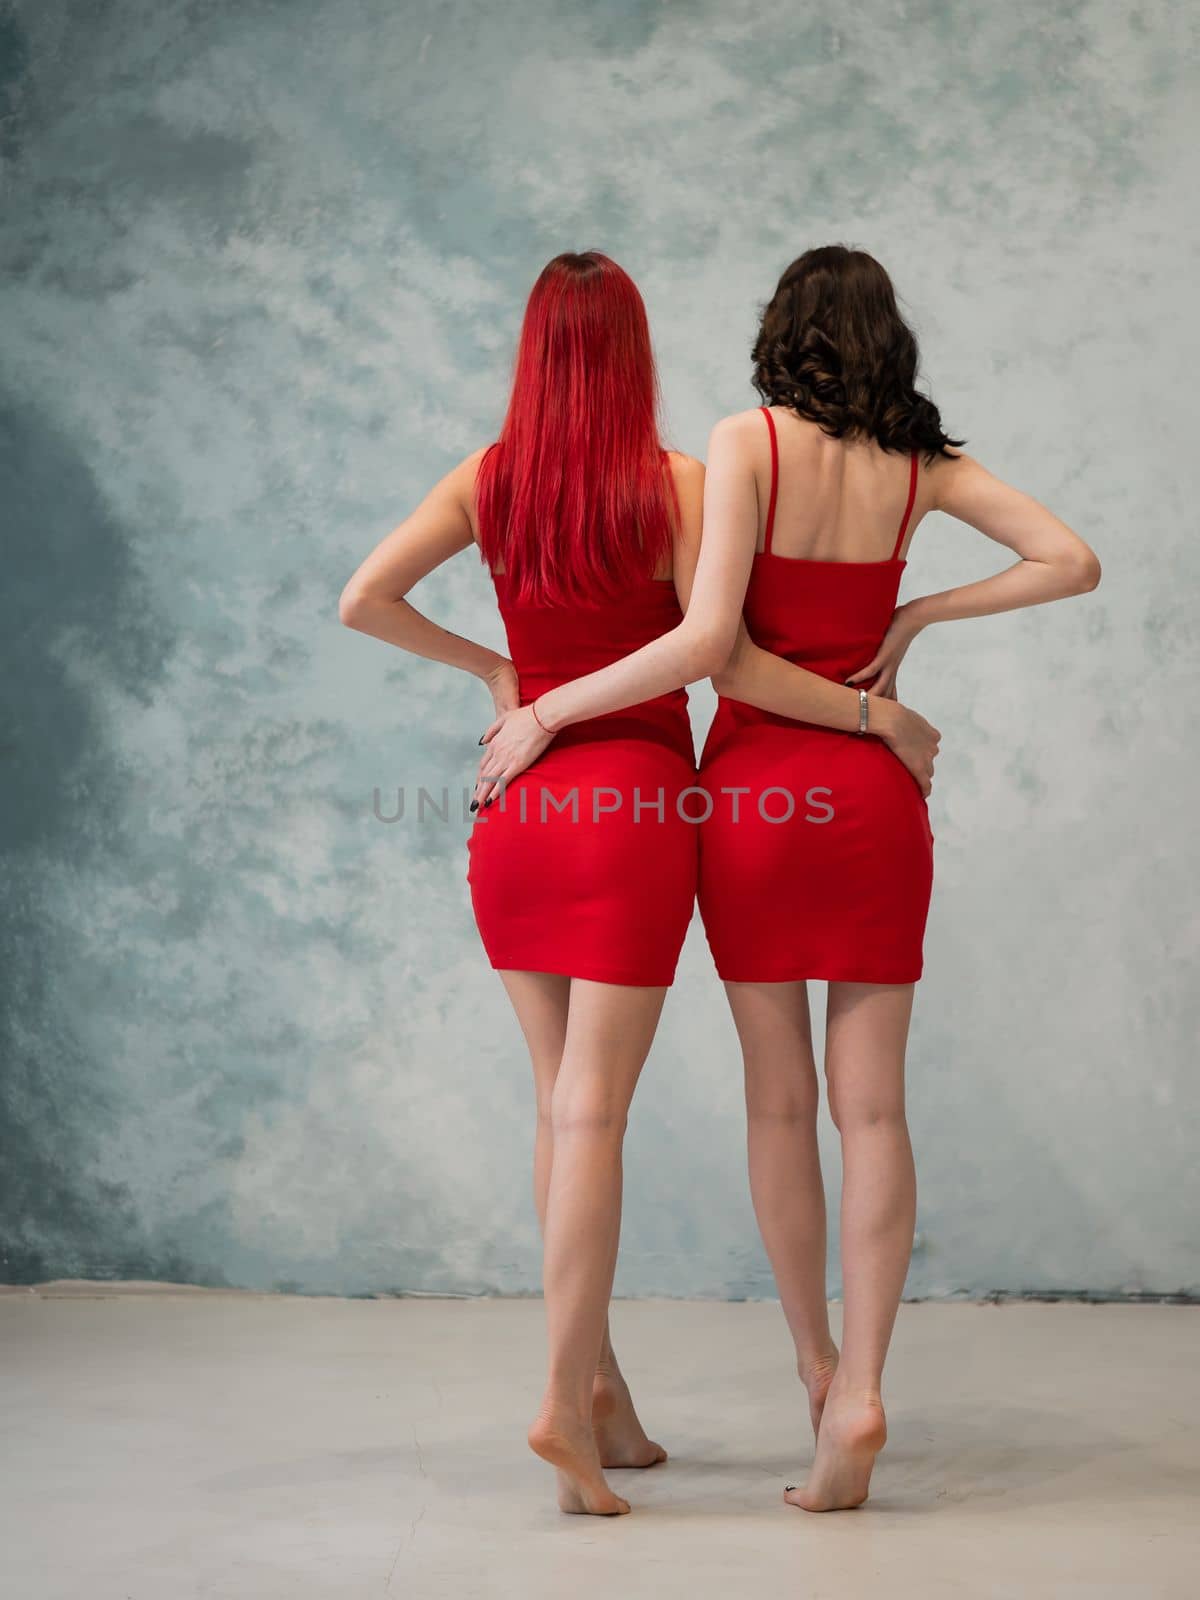 Full-length portrait of two tenderly embracing women dressed in identical red dresses. Lesbian intimacy